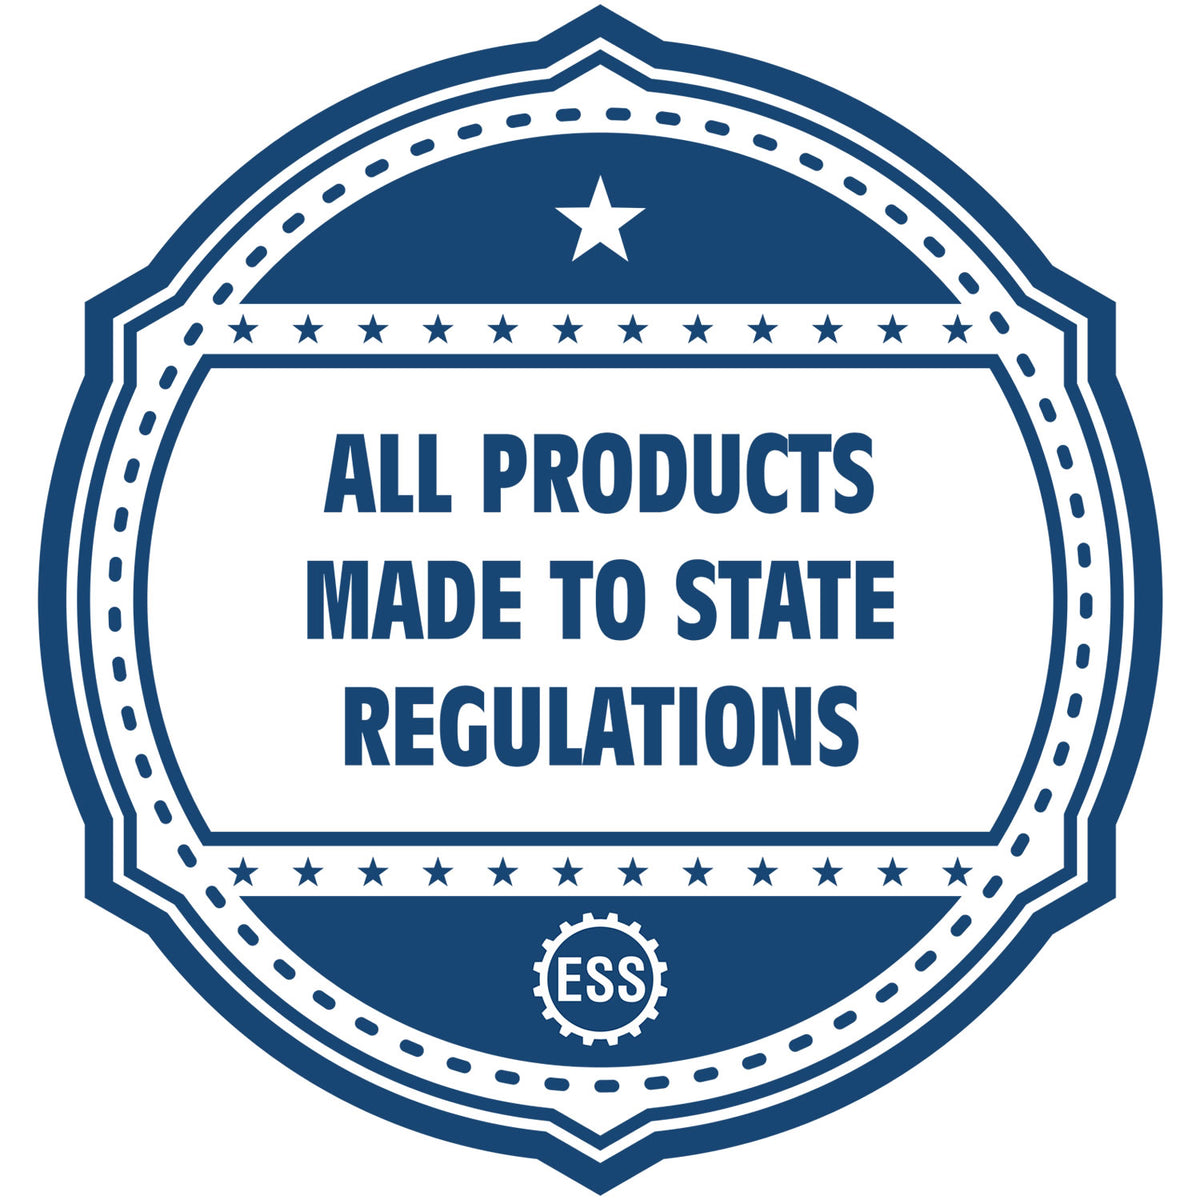 An icon or badge element for the Heavy-Duty Puerto Rico Rectangular Notary Stamp showing that this product is made in compliance with state regulations.